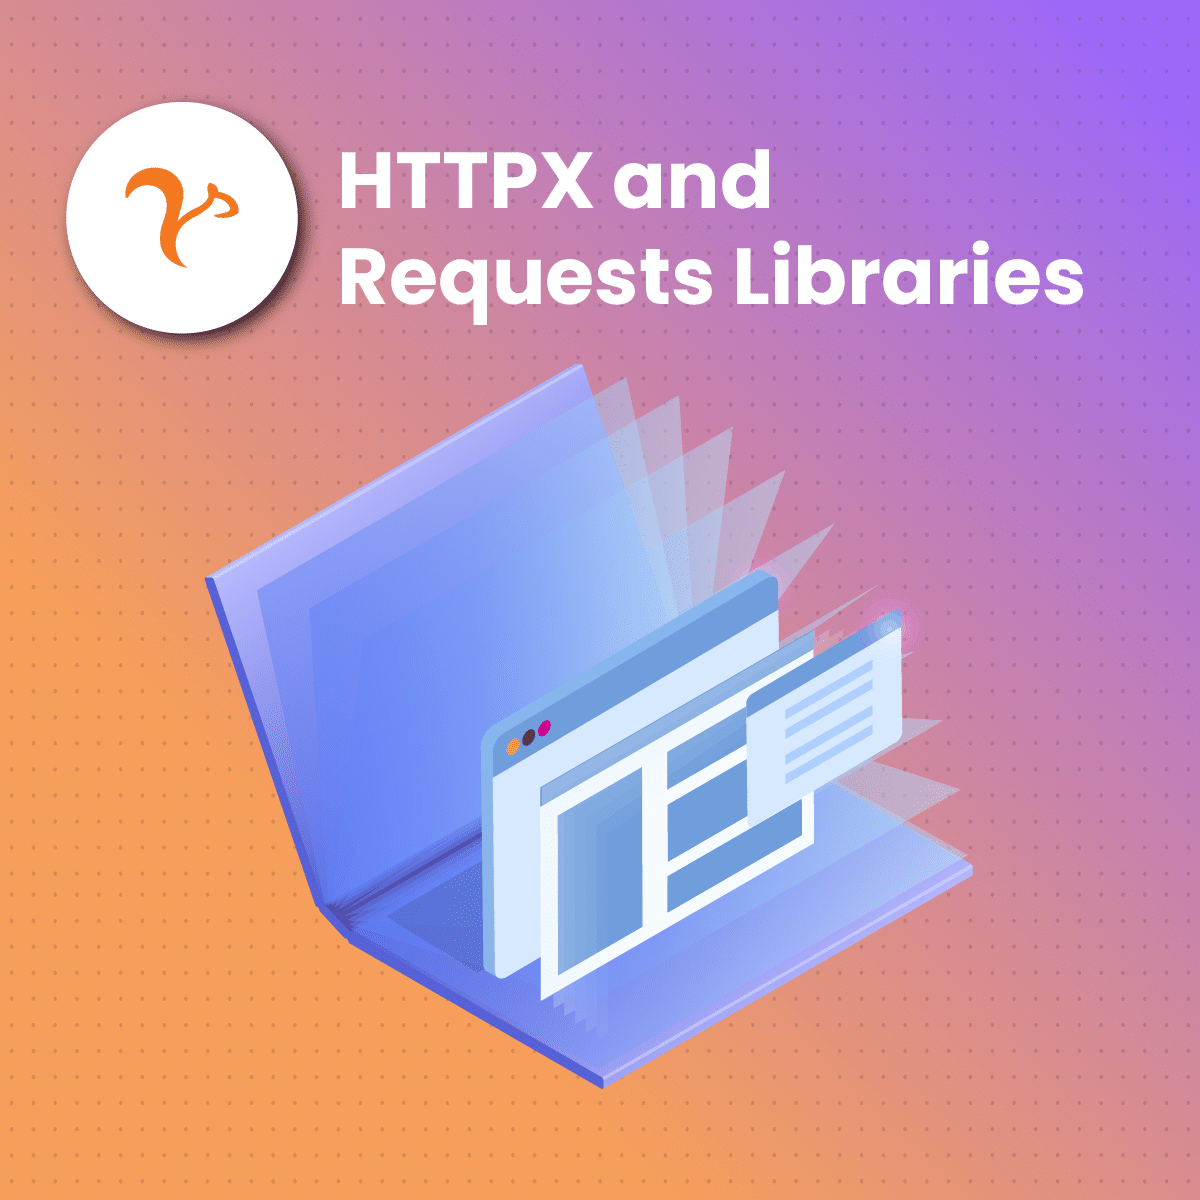 Overview of HTTPX and Requests Libraries